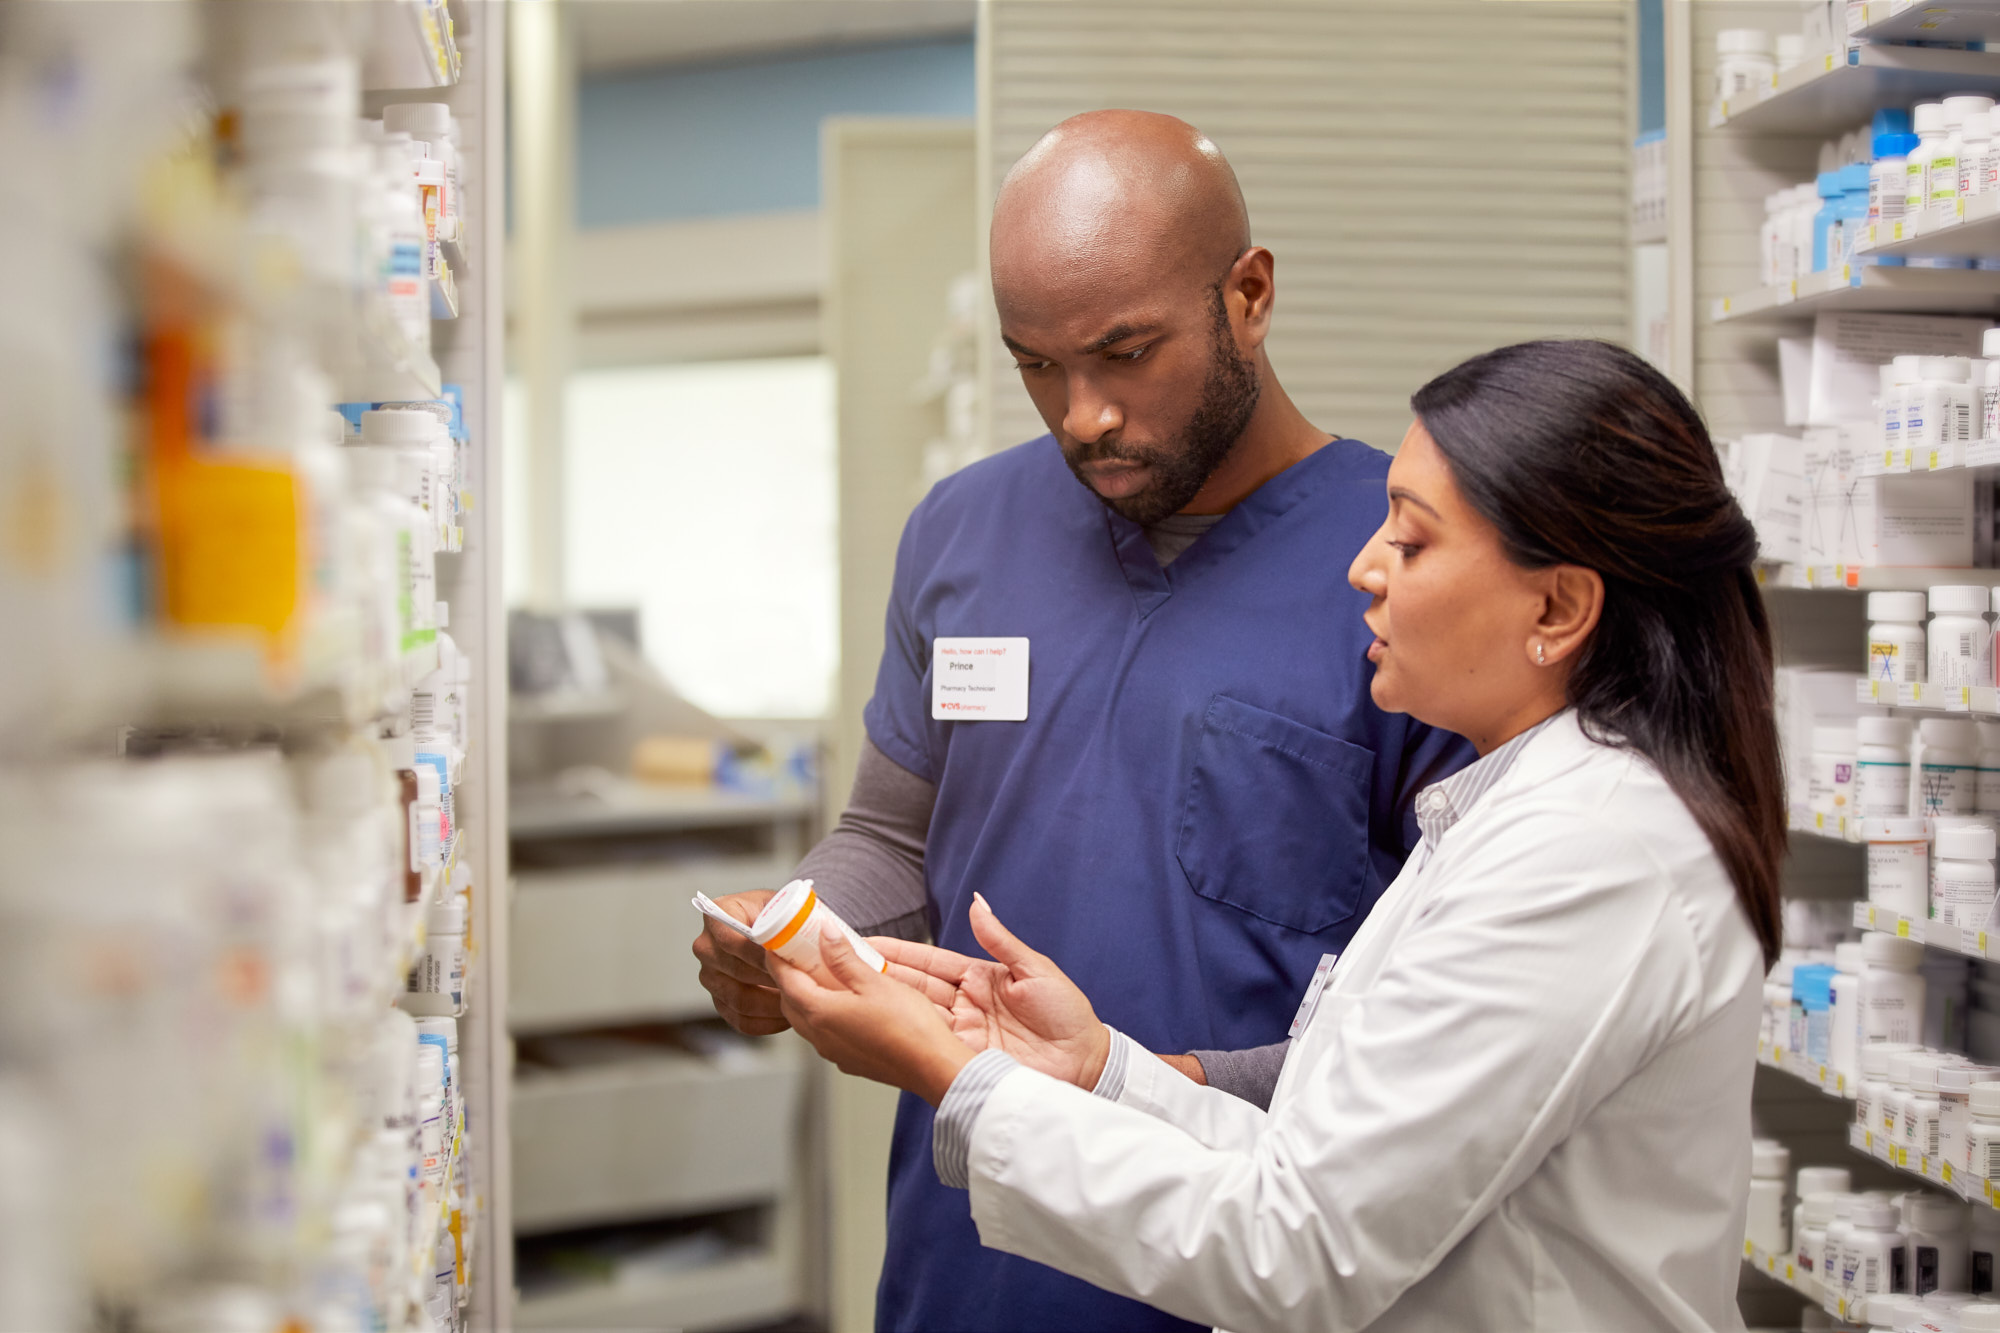 Pharmacist and Technician | Healthcare Lifestyle Photography